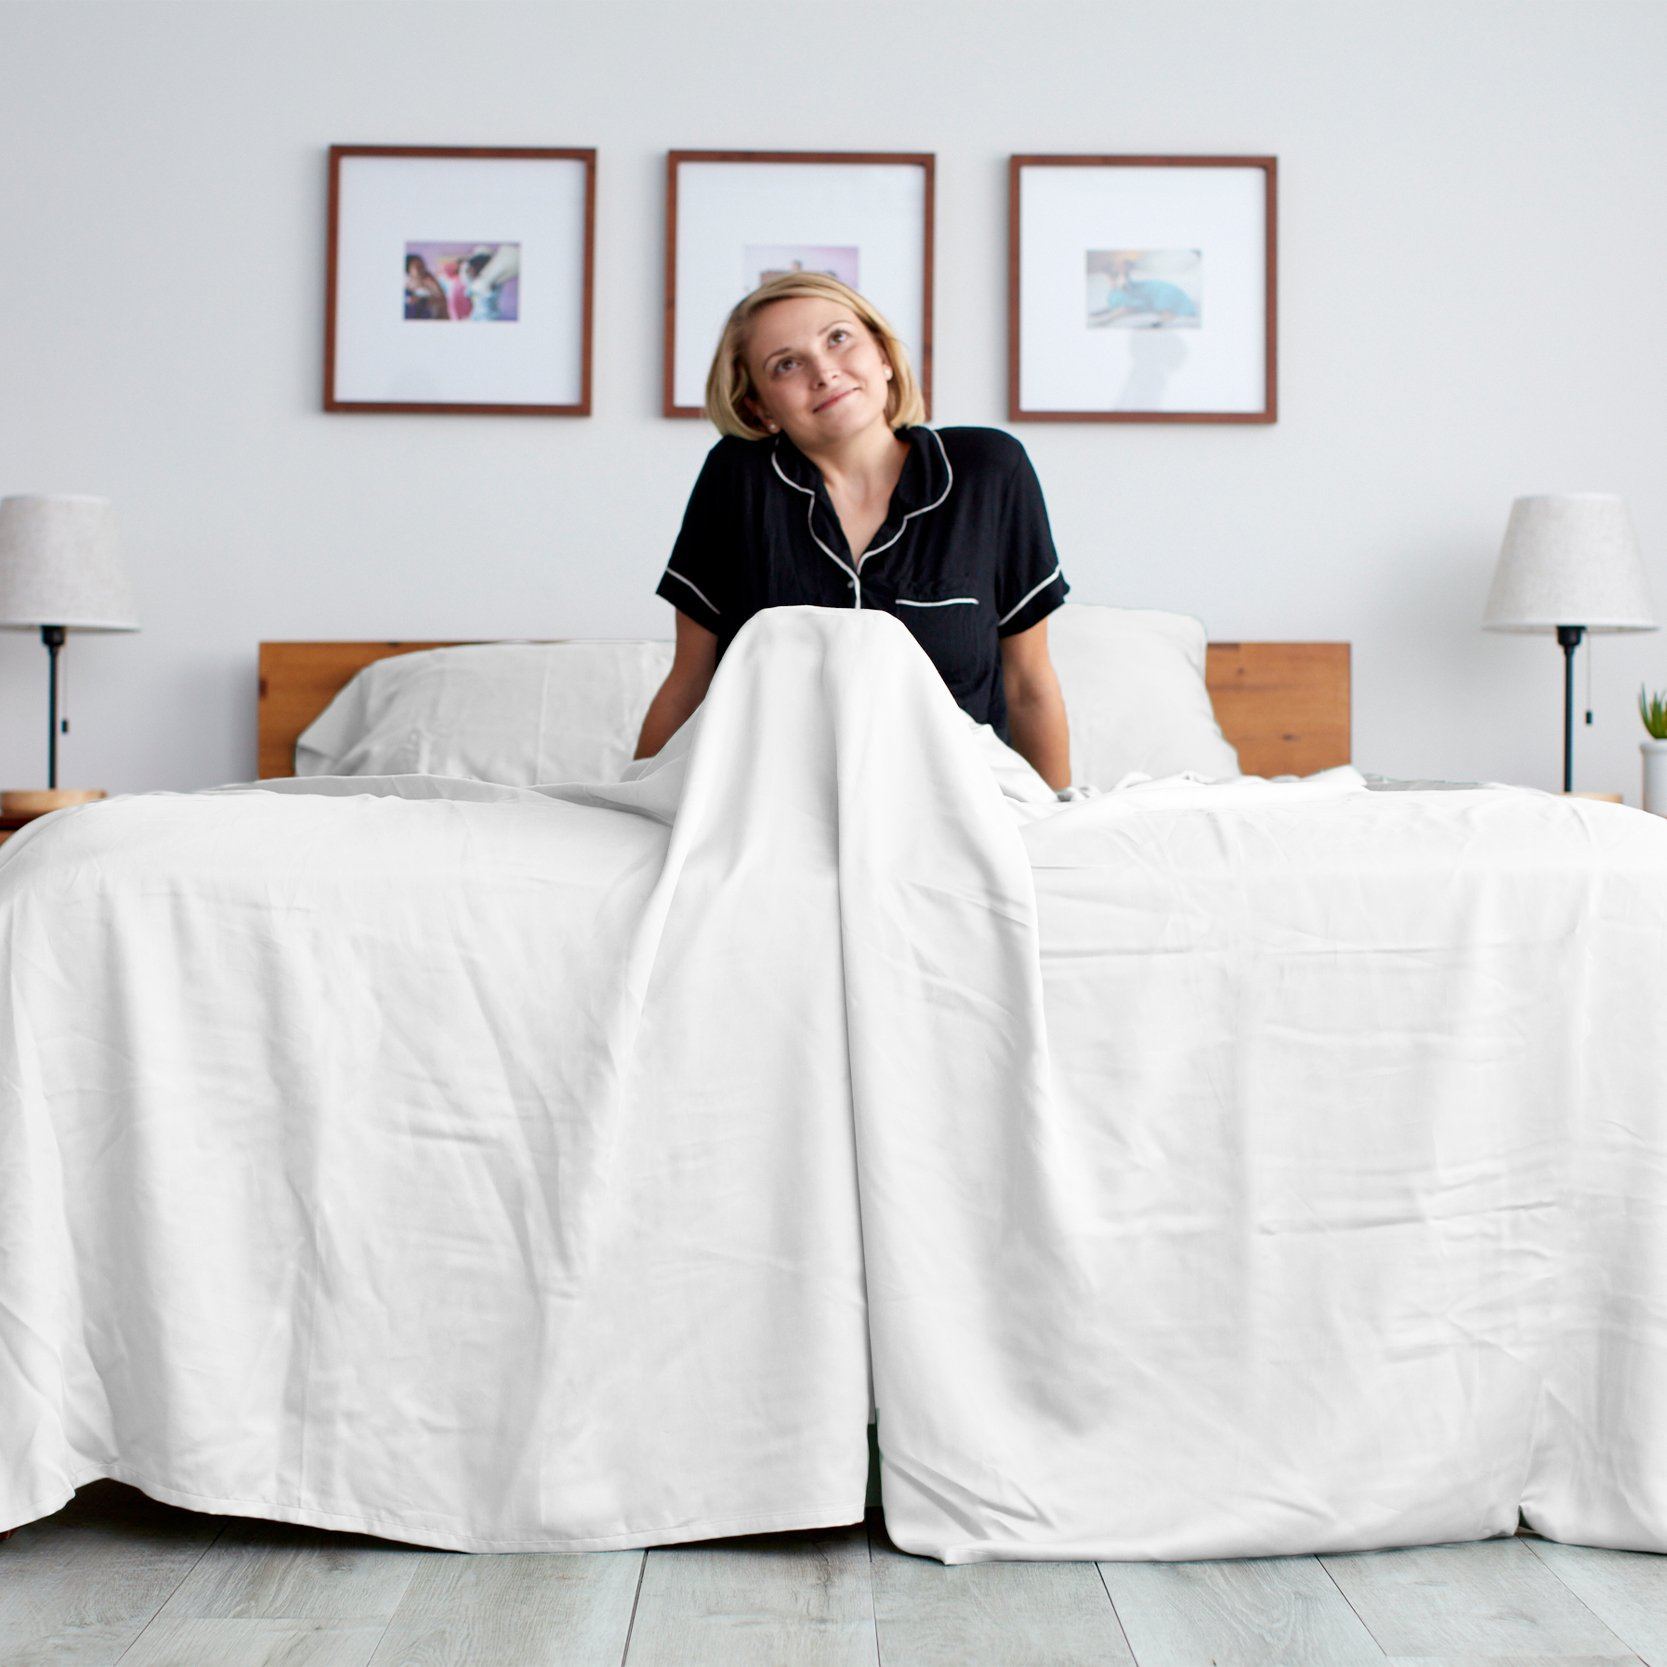 What Is a Fitted Sheet, and How Is It Different From a Top Sheet?